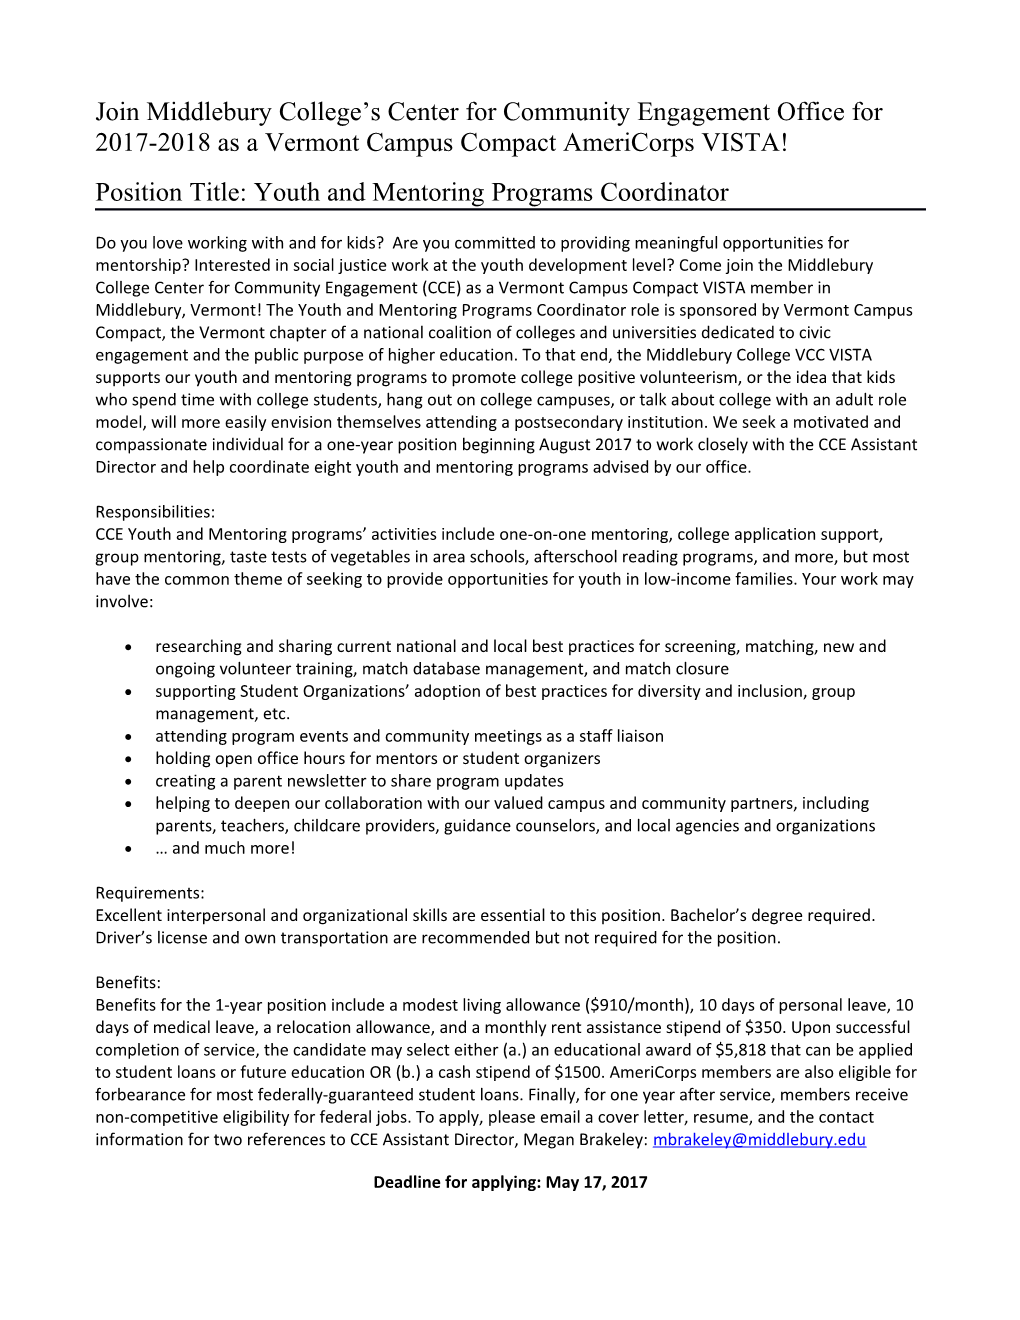 Position Title: Youth and Mentoring Programs Coordinator